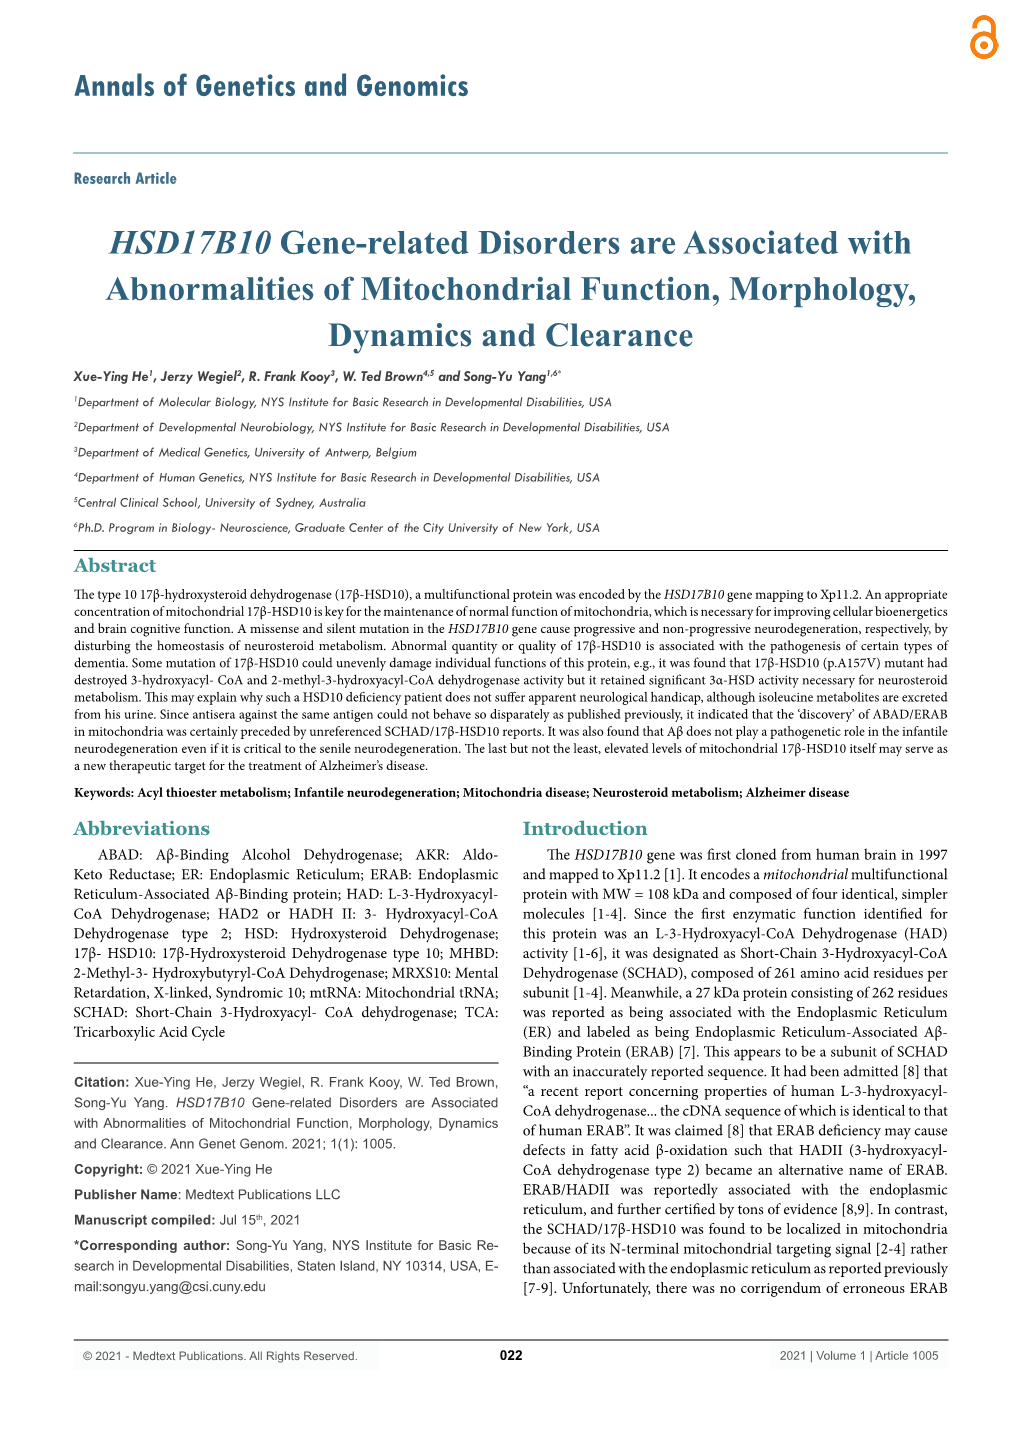 HSD17B10 Gene-Related Disorders Are Associated with Abnormalities of Mitochondrial Function, Morphology, Dynamics and Clearance Xue-Ying He1, Jerzy Wegiel2, R